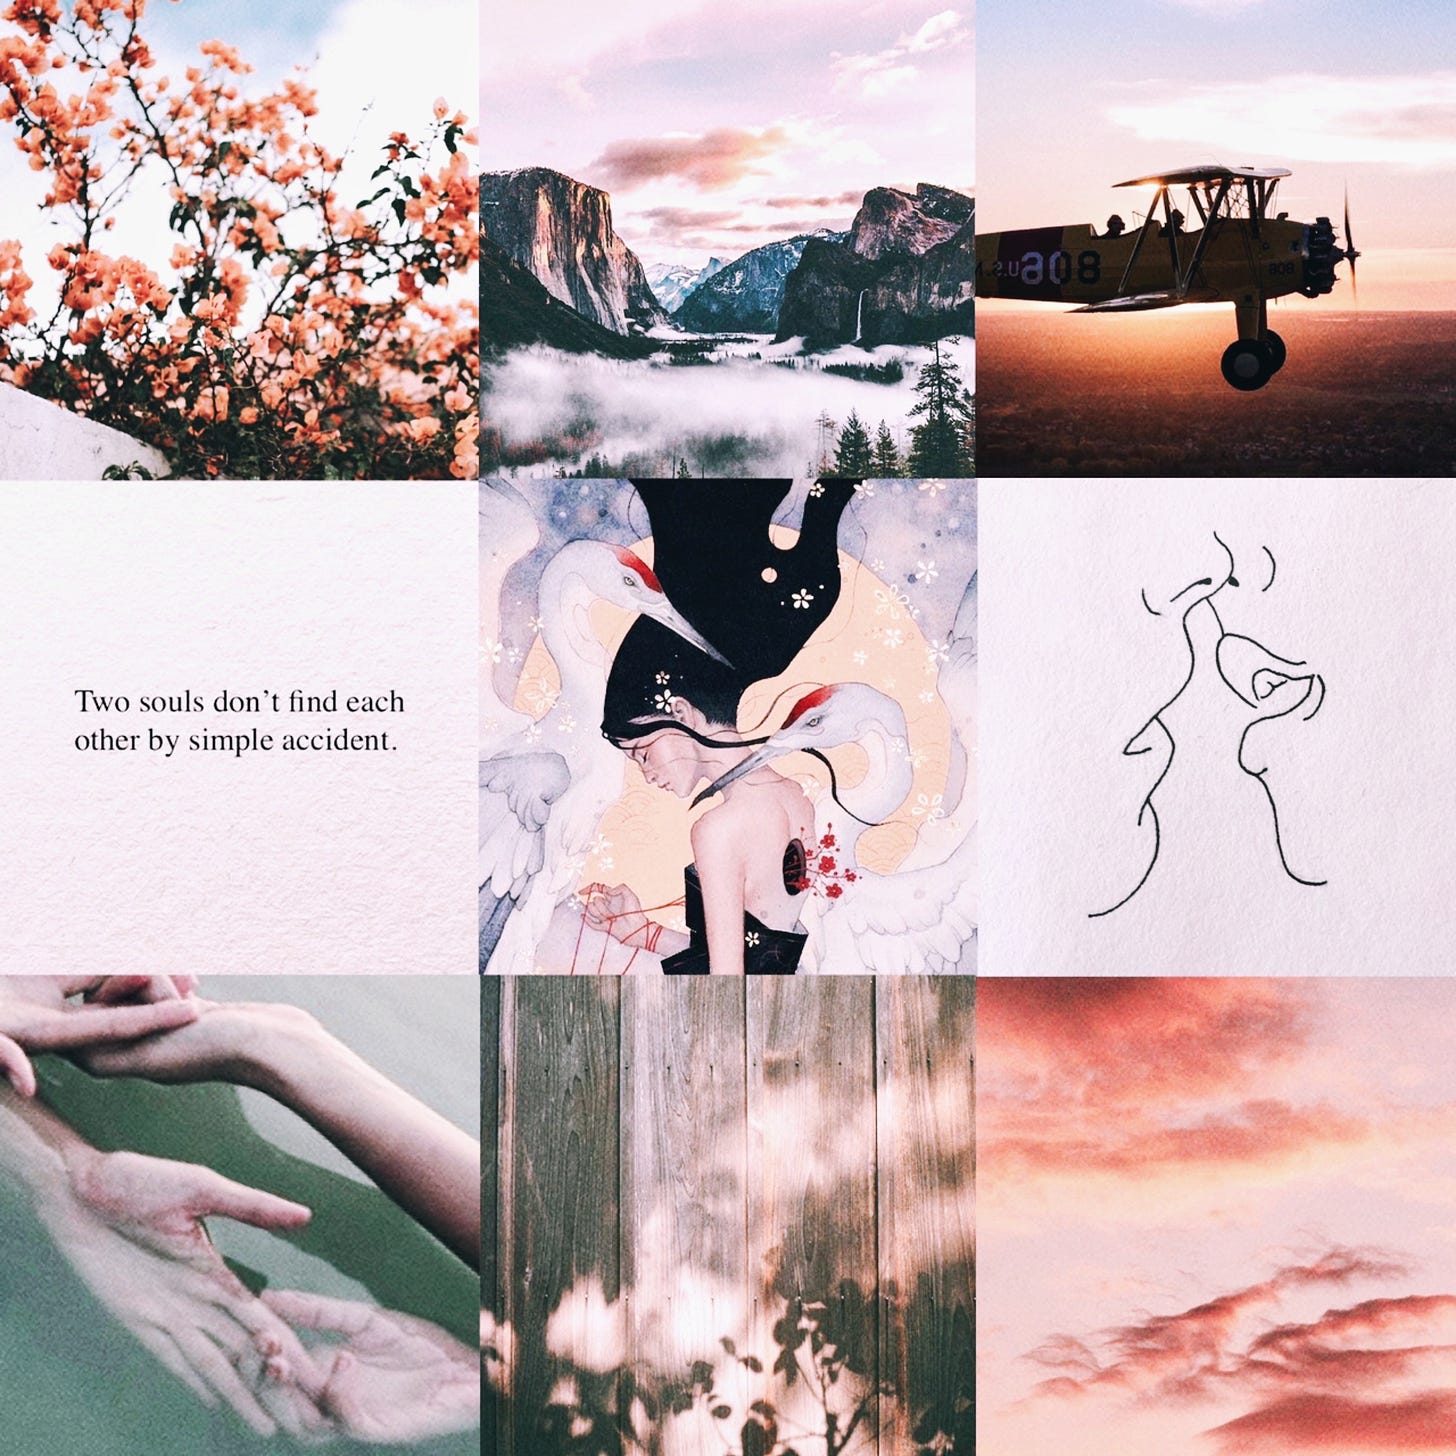 3 by 3 moodboard, with pictures from top left to bottom right: 1. pink-orange blossoms against a light blue sky, 2. brown cliffs against a pink-purple-tinged sky, 3. A biplane silhouetted against the sunset, 4. "two souls don't find each other by simple accident", 5. illustration of a girl with a hole in her back, through which she's pulling out a red string; two herons flank her, 6. line art of two people kissing, 7. a pair of hands grasping each other in milky green water, 8. wooden floorboards overlaid with shadows, 9. pink sky and clouds